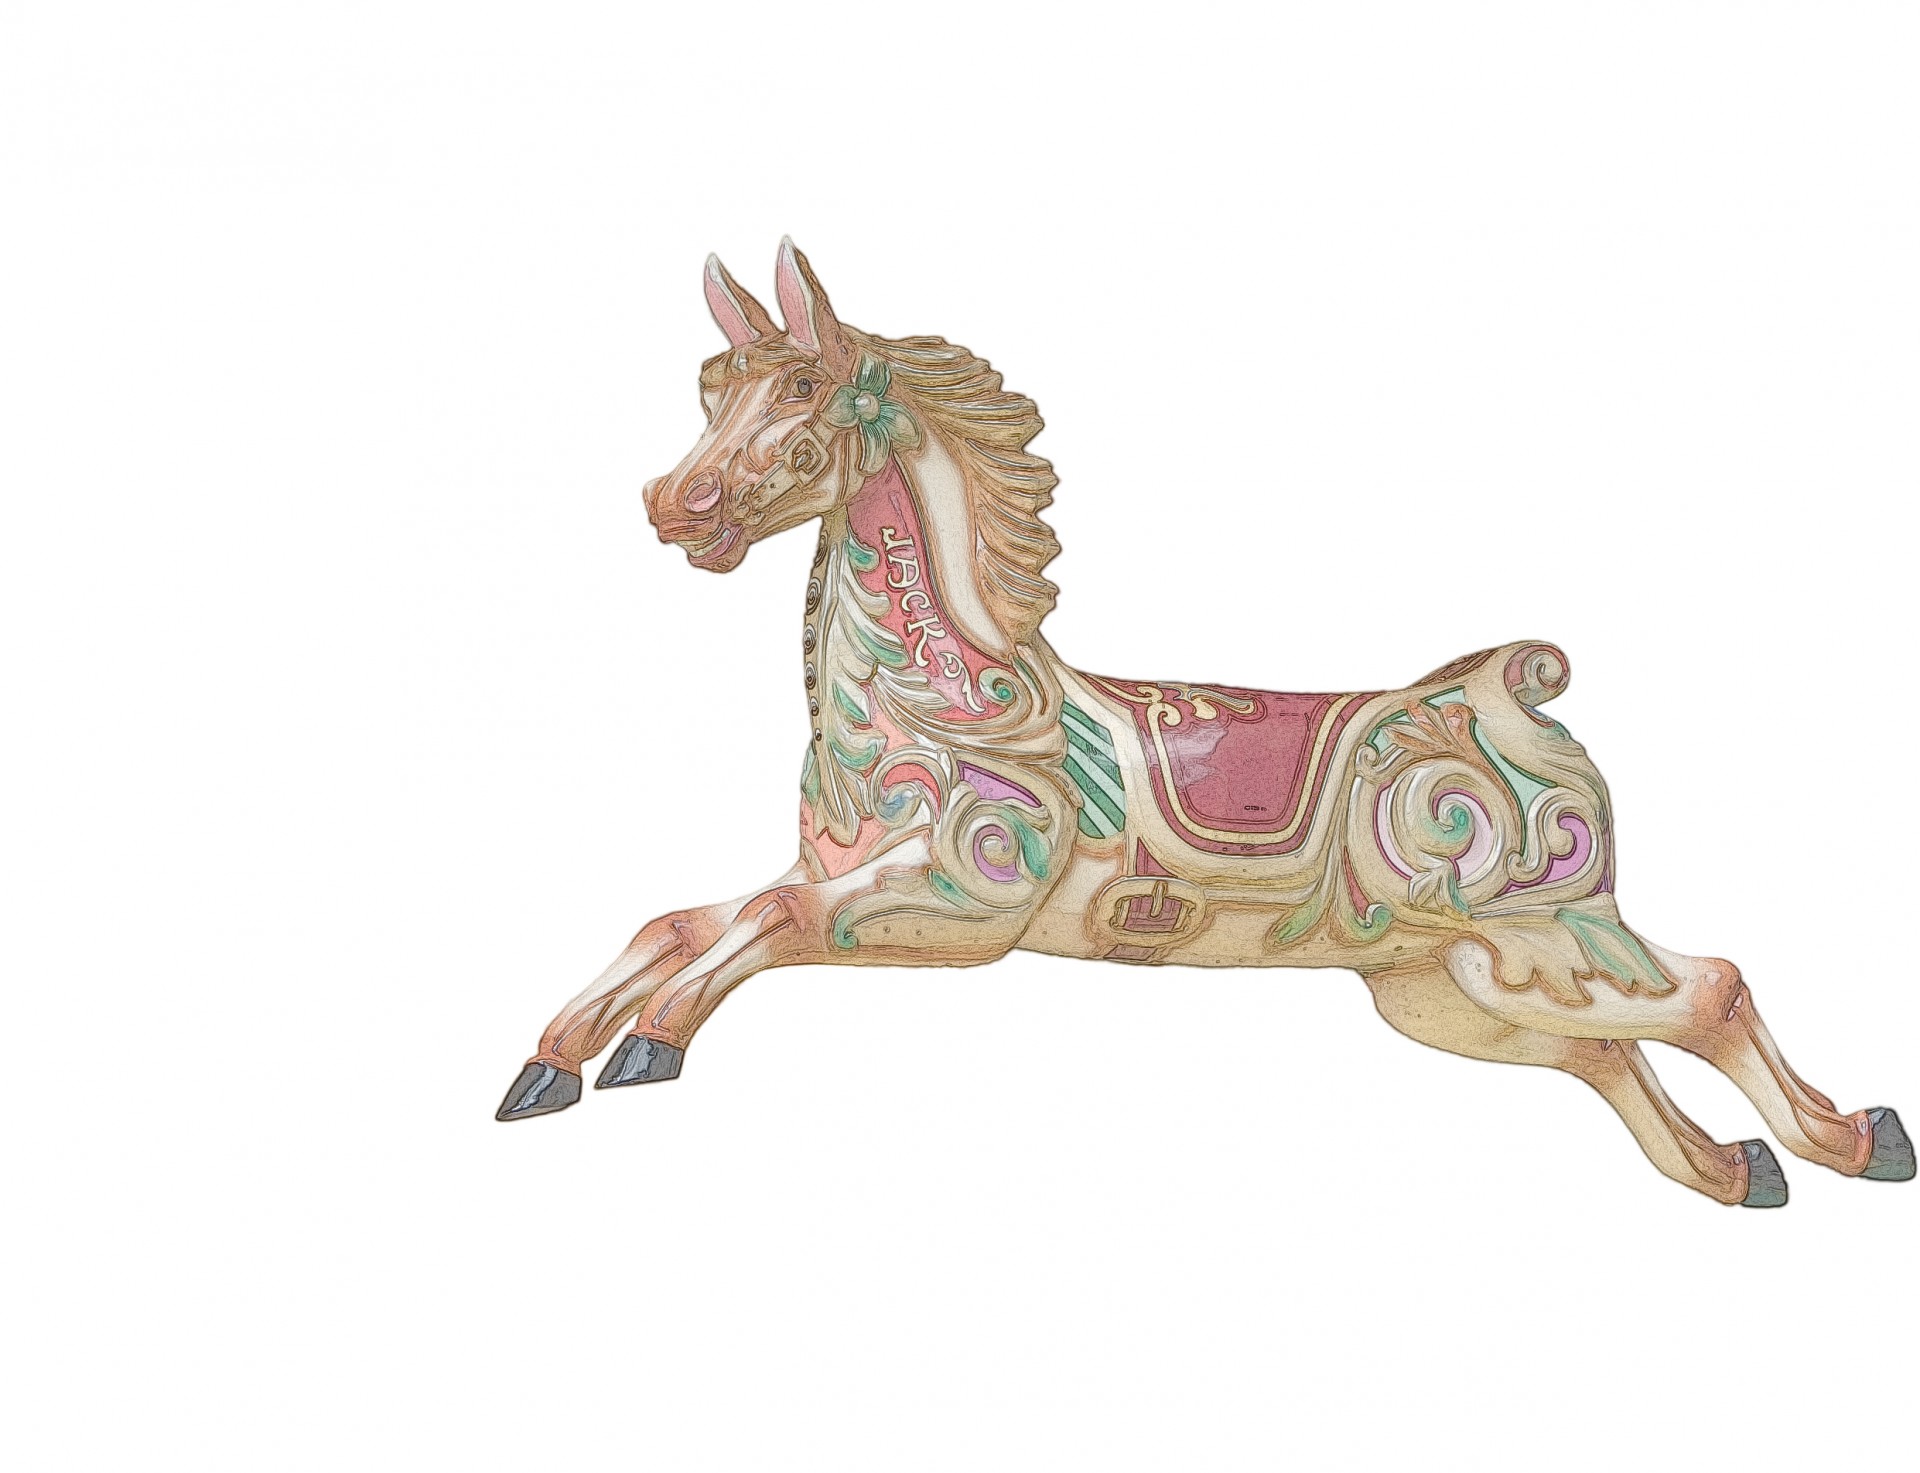 Carousel clipart carousel horse. Colorful free stock photo